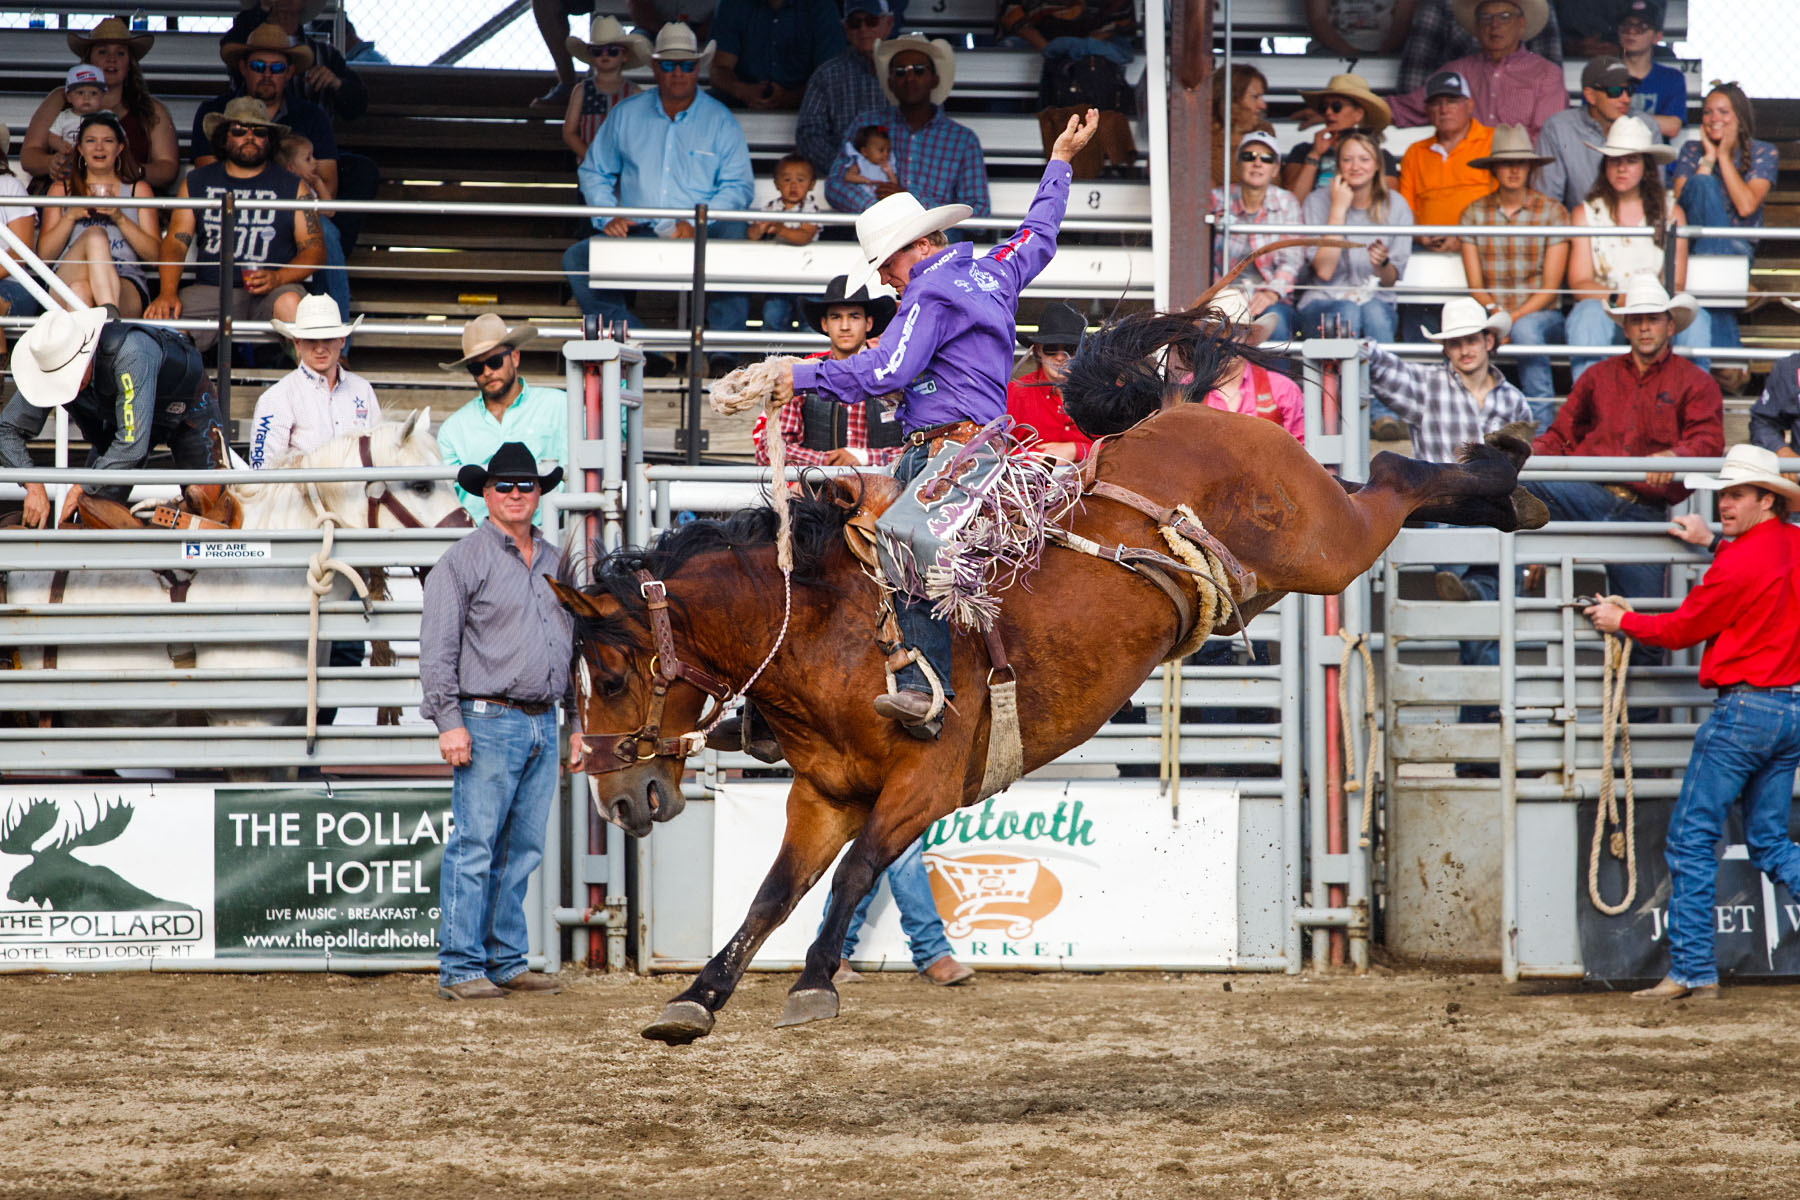 Saddle Bronc, Home of Champions Rodeo, Red Lodge, MT.  Click for next photo.